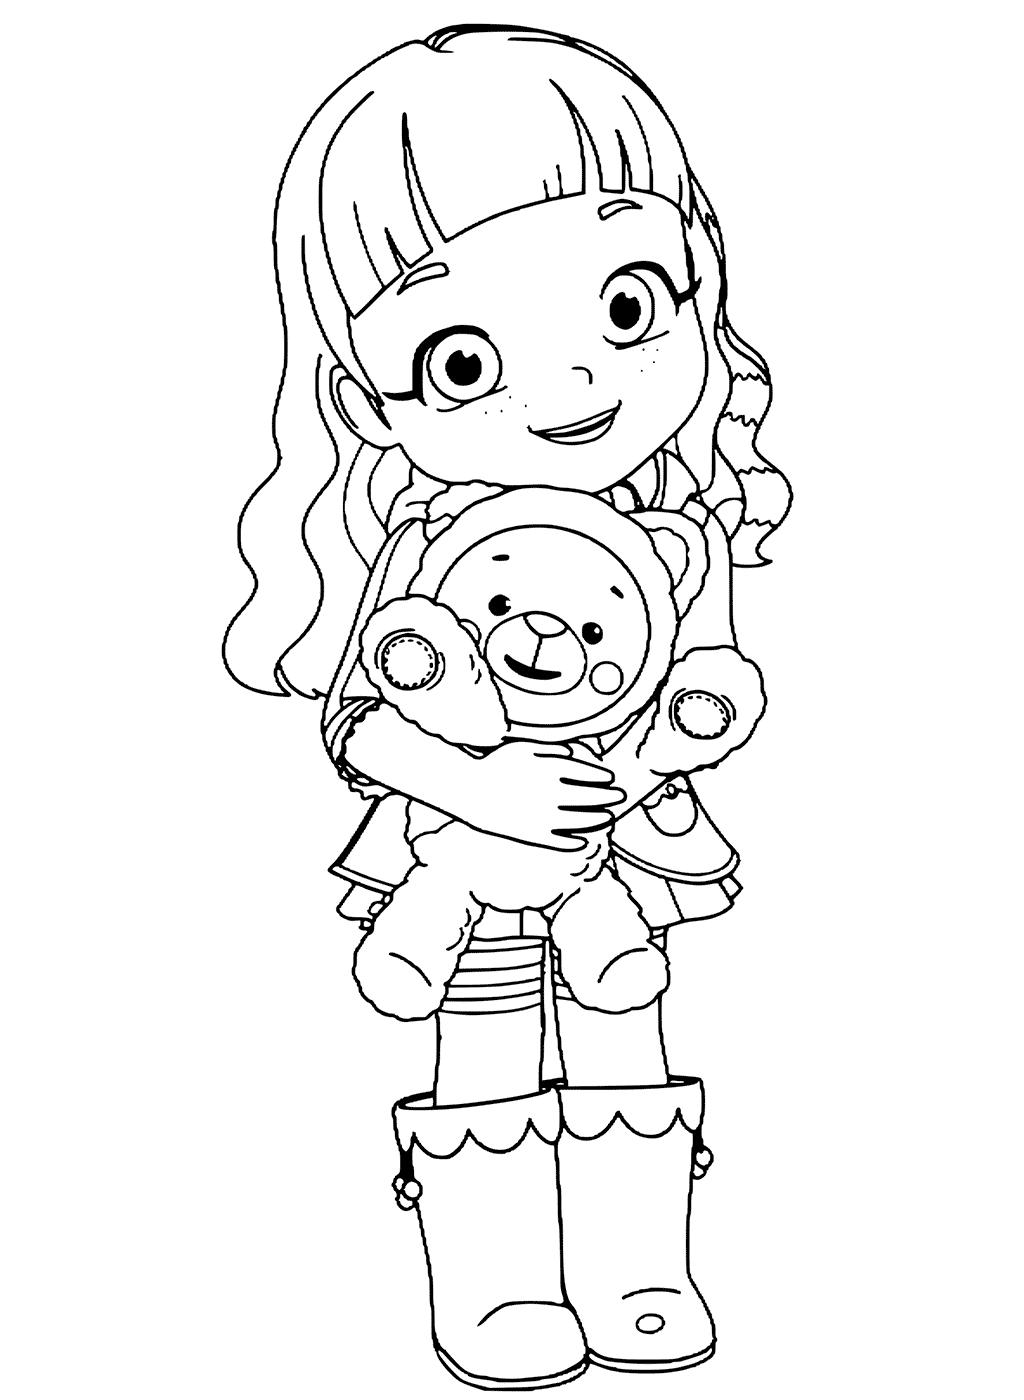 Rainbow Ruby Coloring Pages - GetColoringPages.com